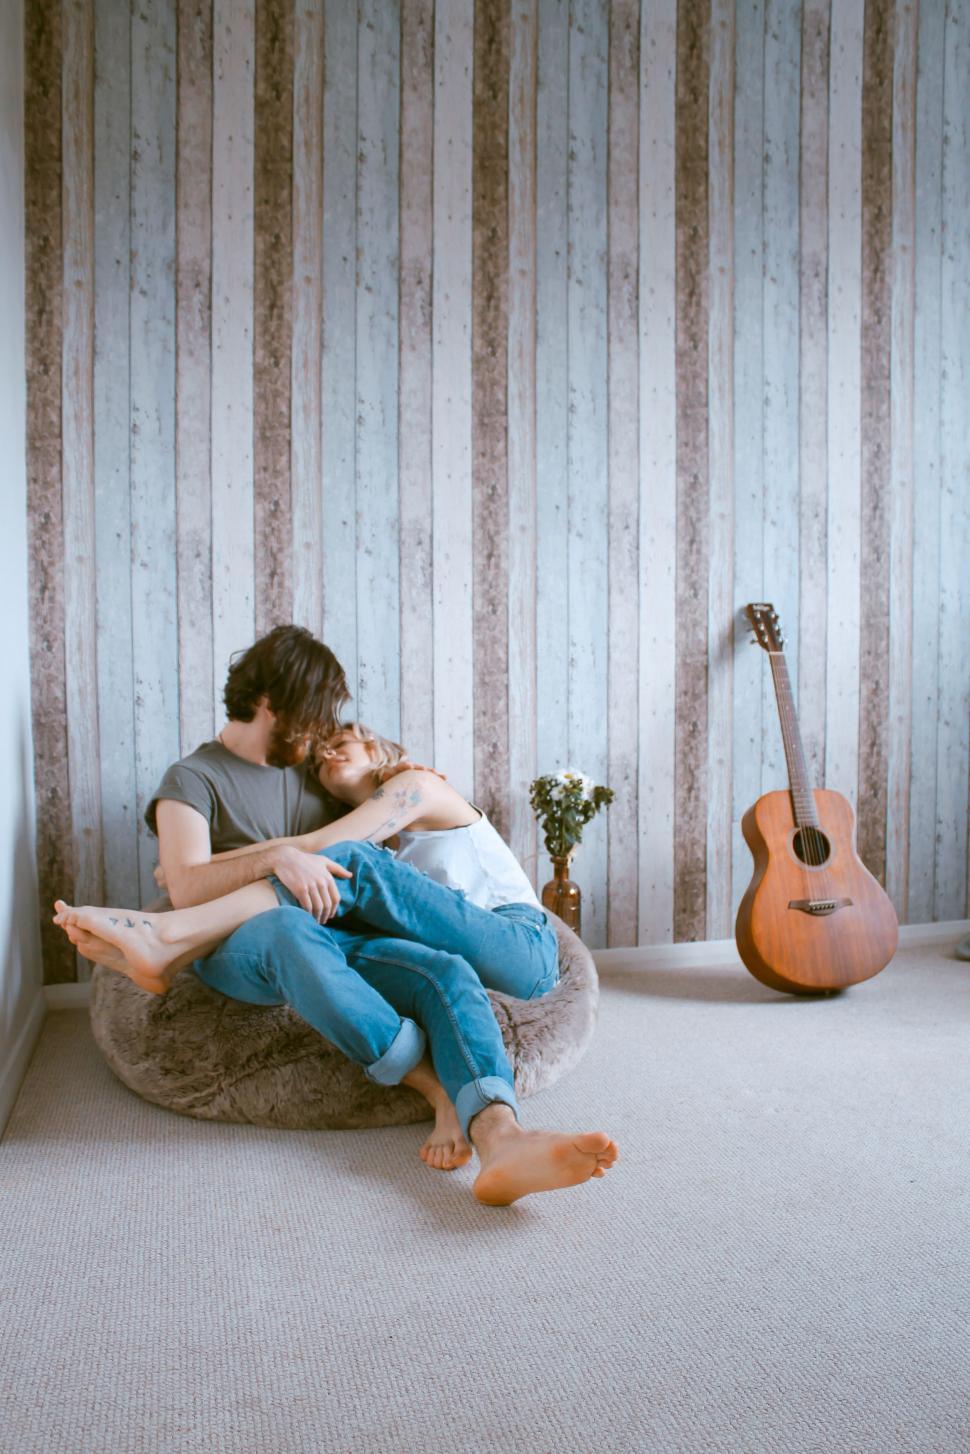 Free Image of Man and Woman Sitting on Bean Bag Chair 